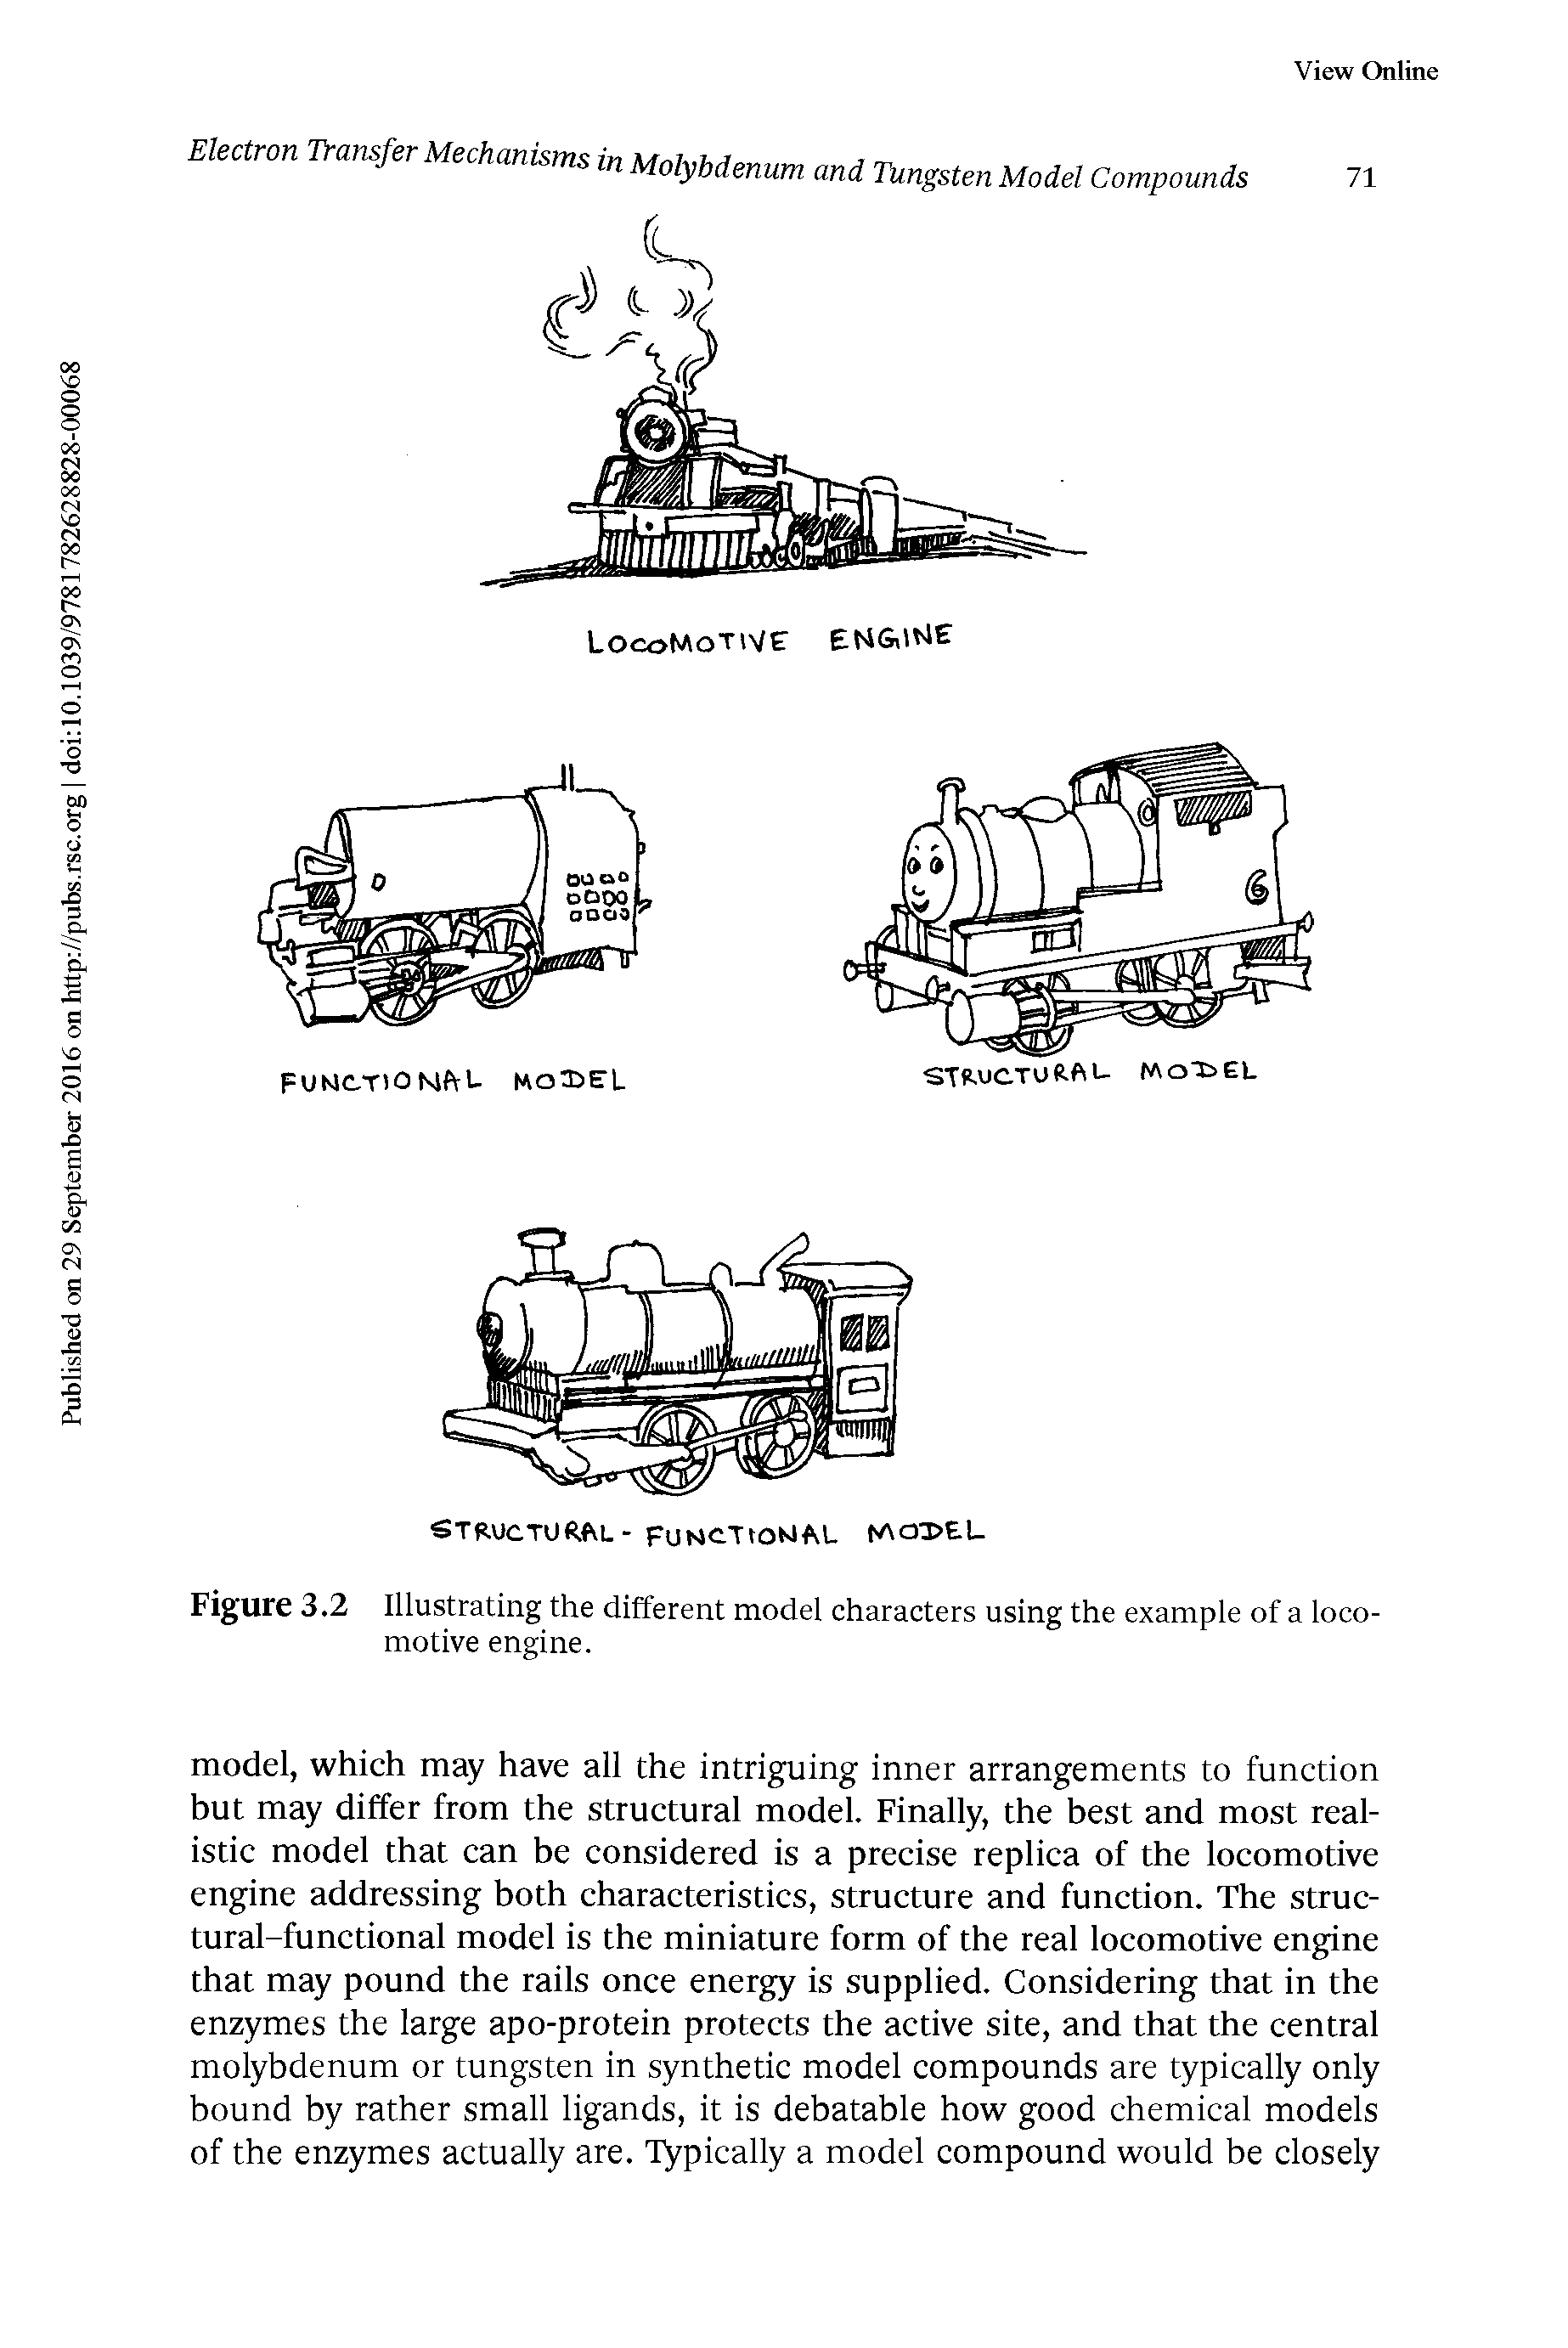 Figure 3.2 Illustrating the different model characters using the example of a locomotive engine.